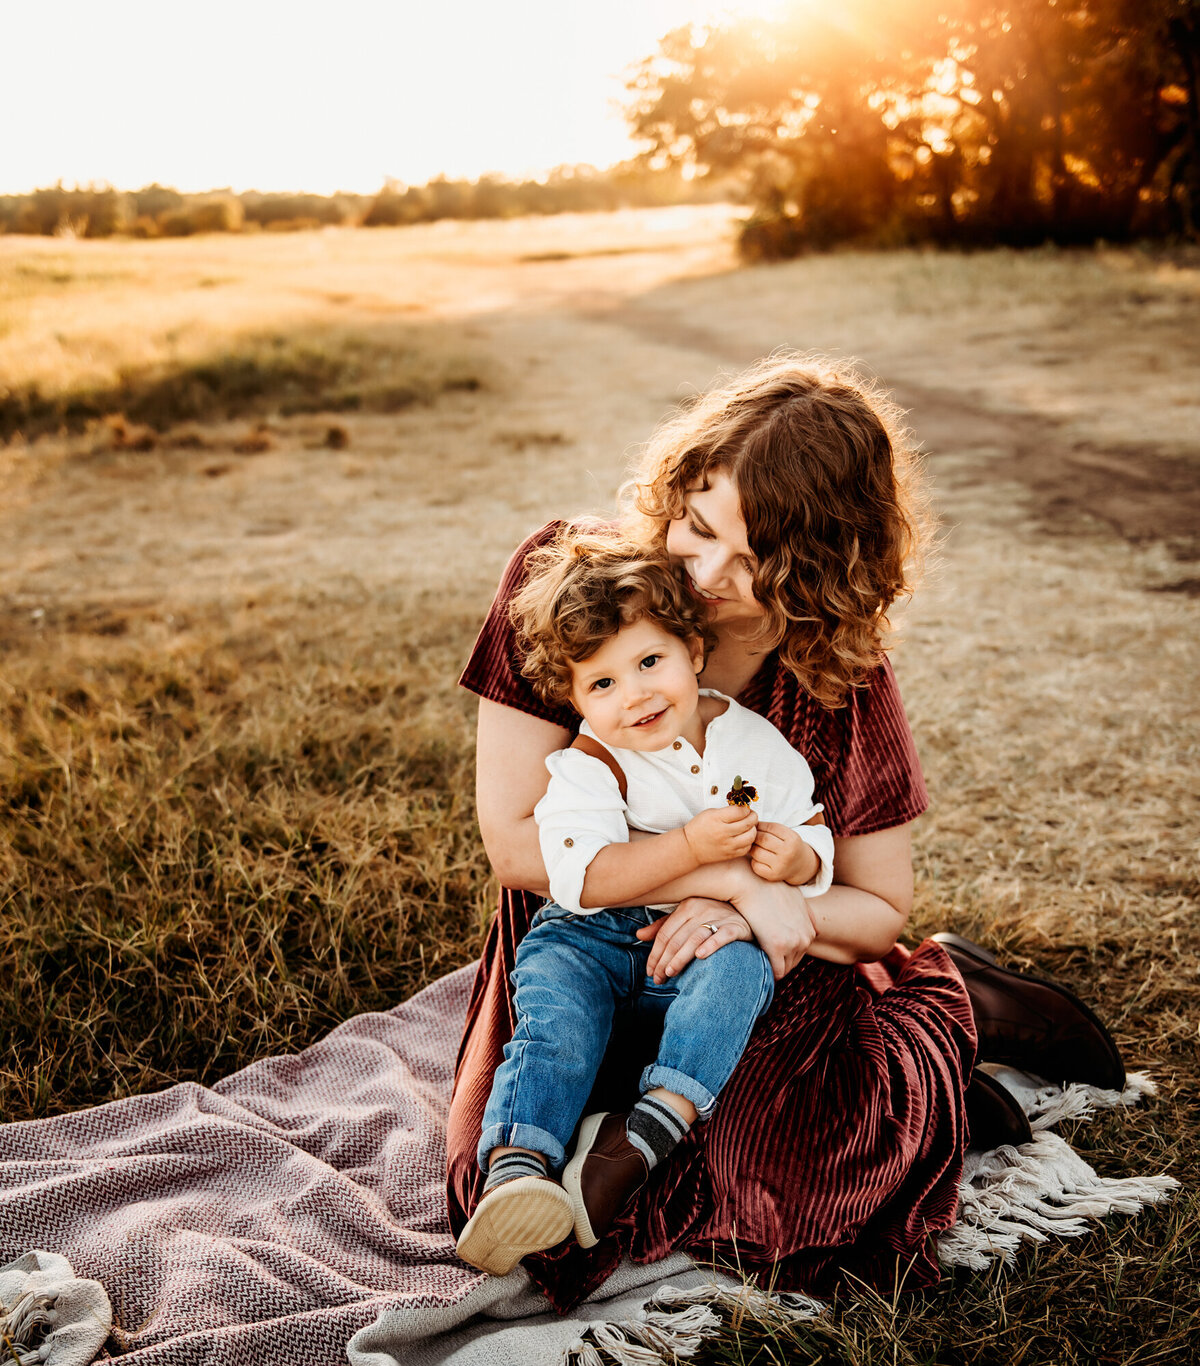 Mom kissing little boy on a blanket in the sunset.